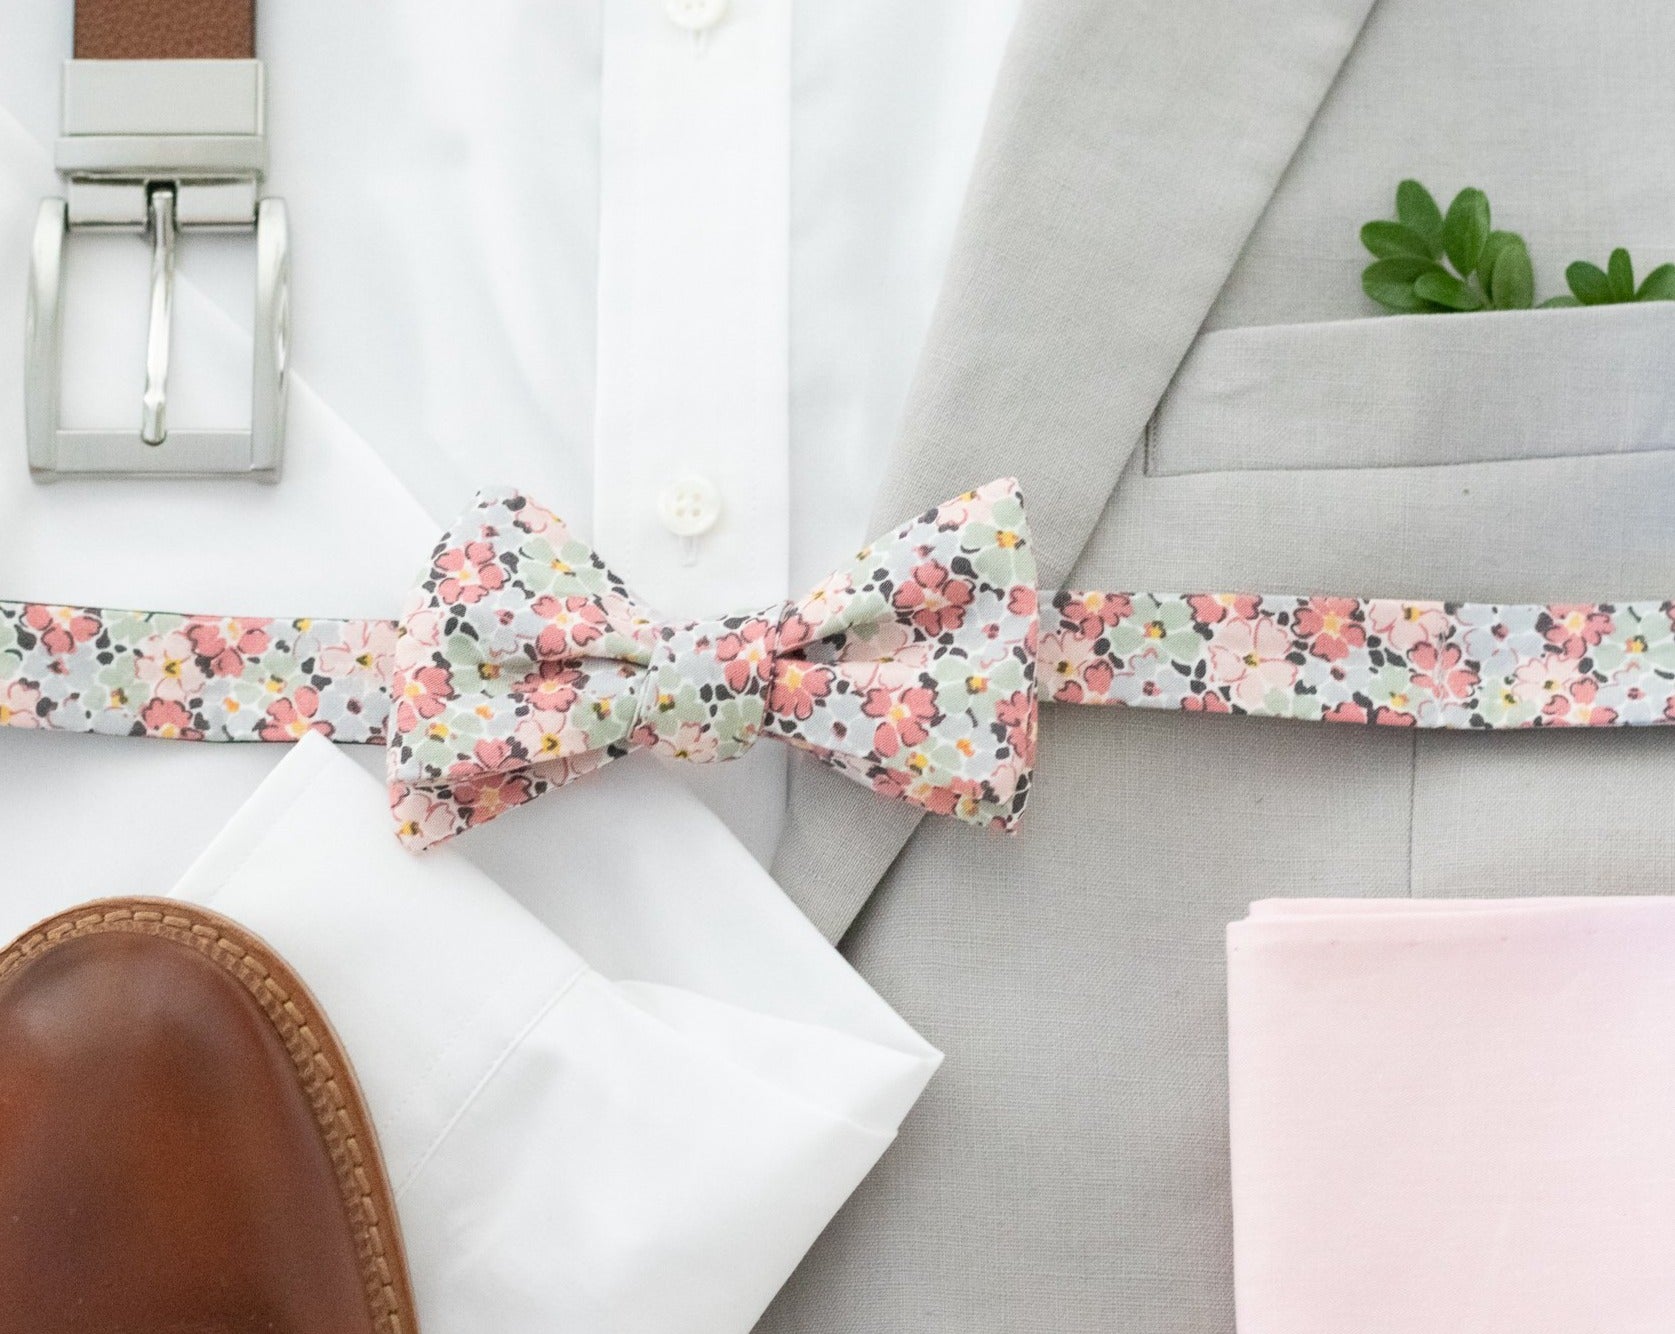 Men's pink floral bow tie made from 100% cotton.